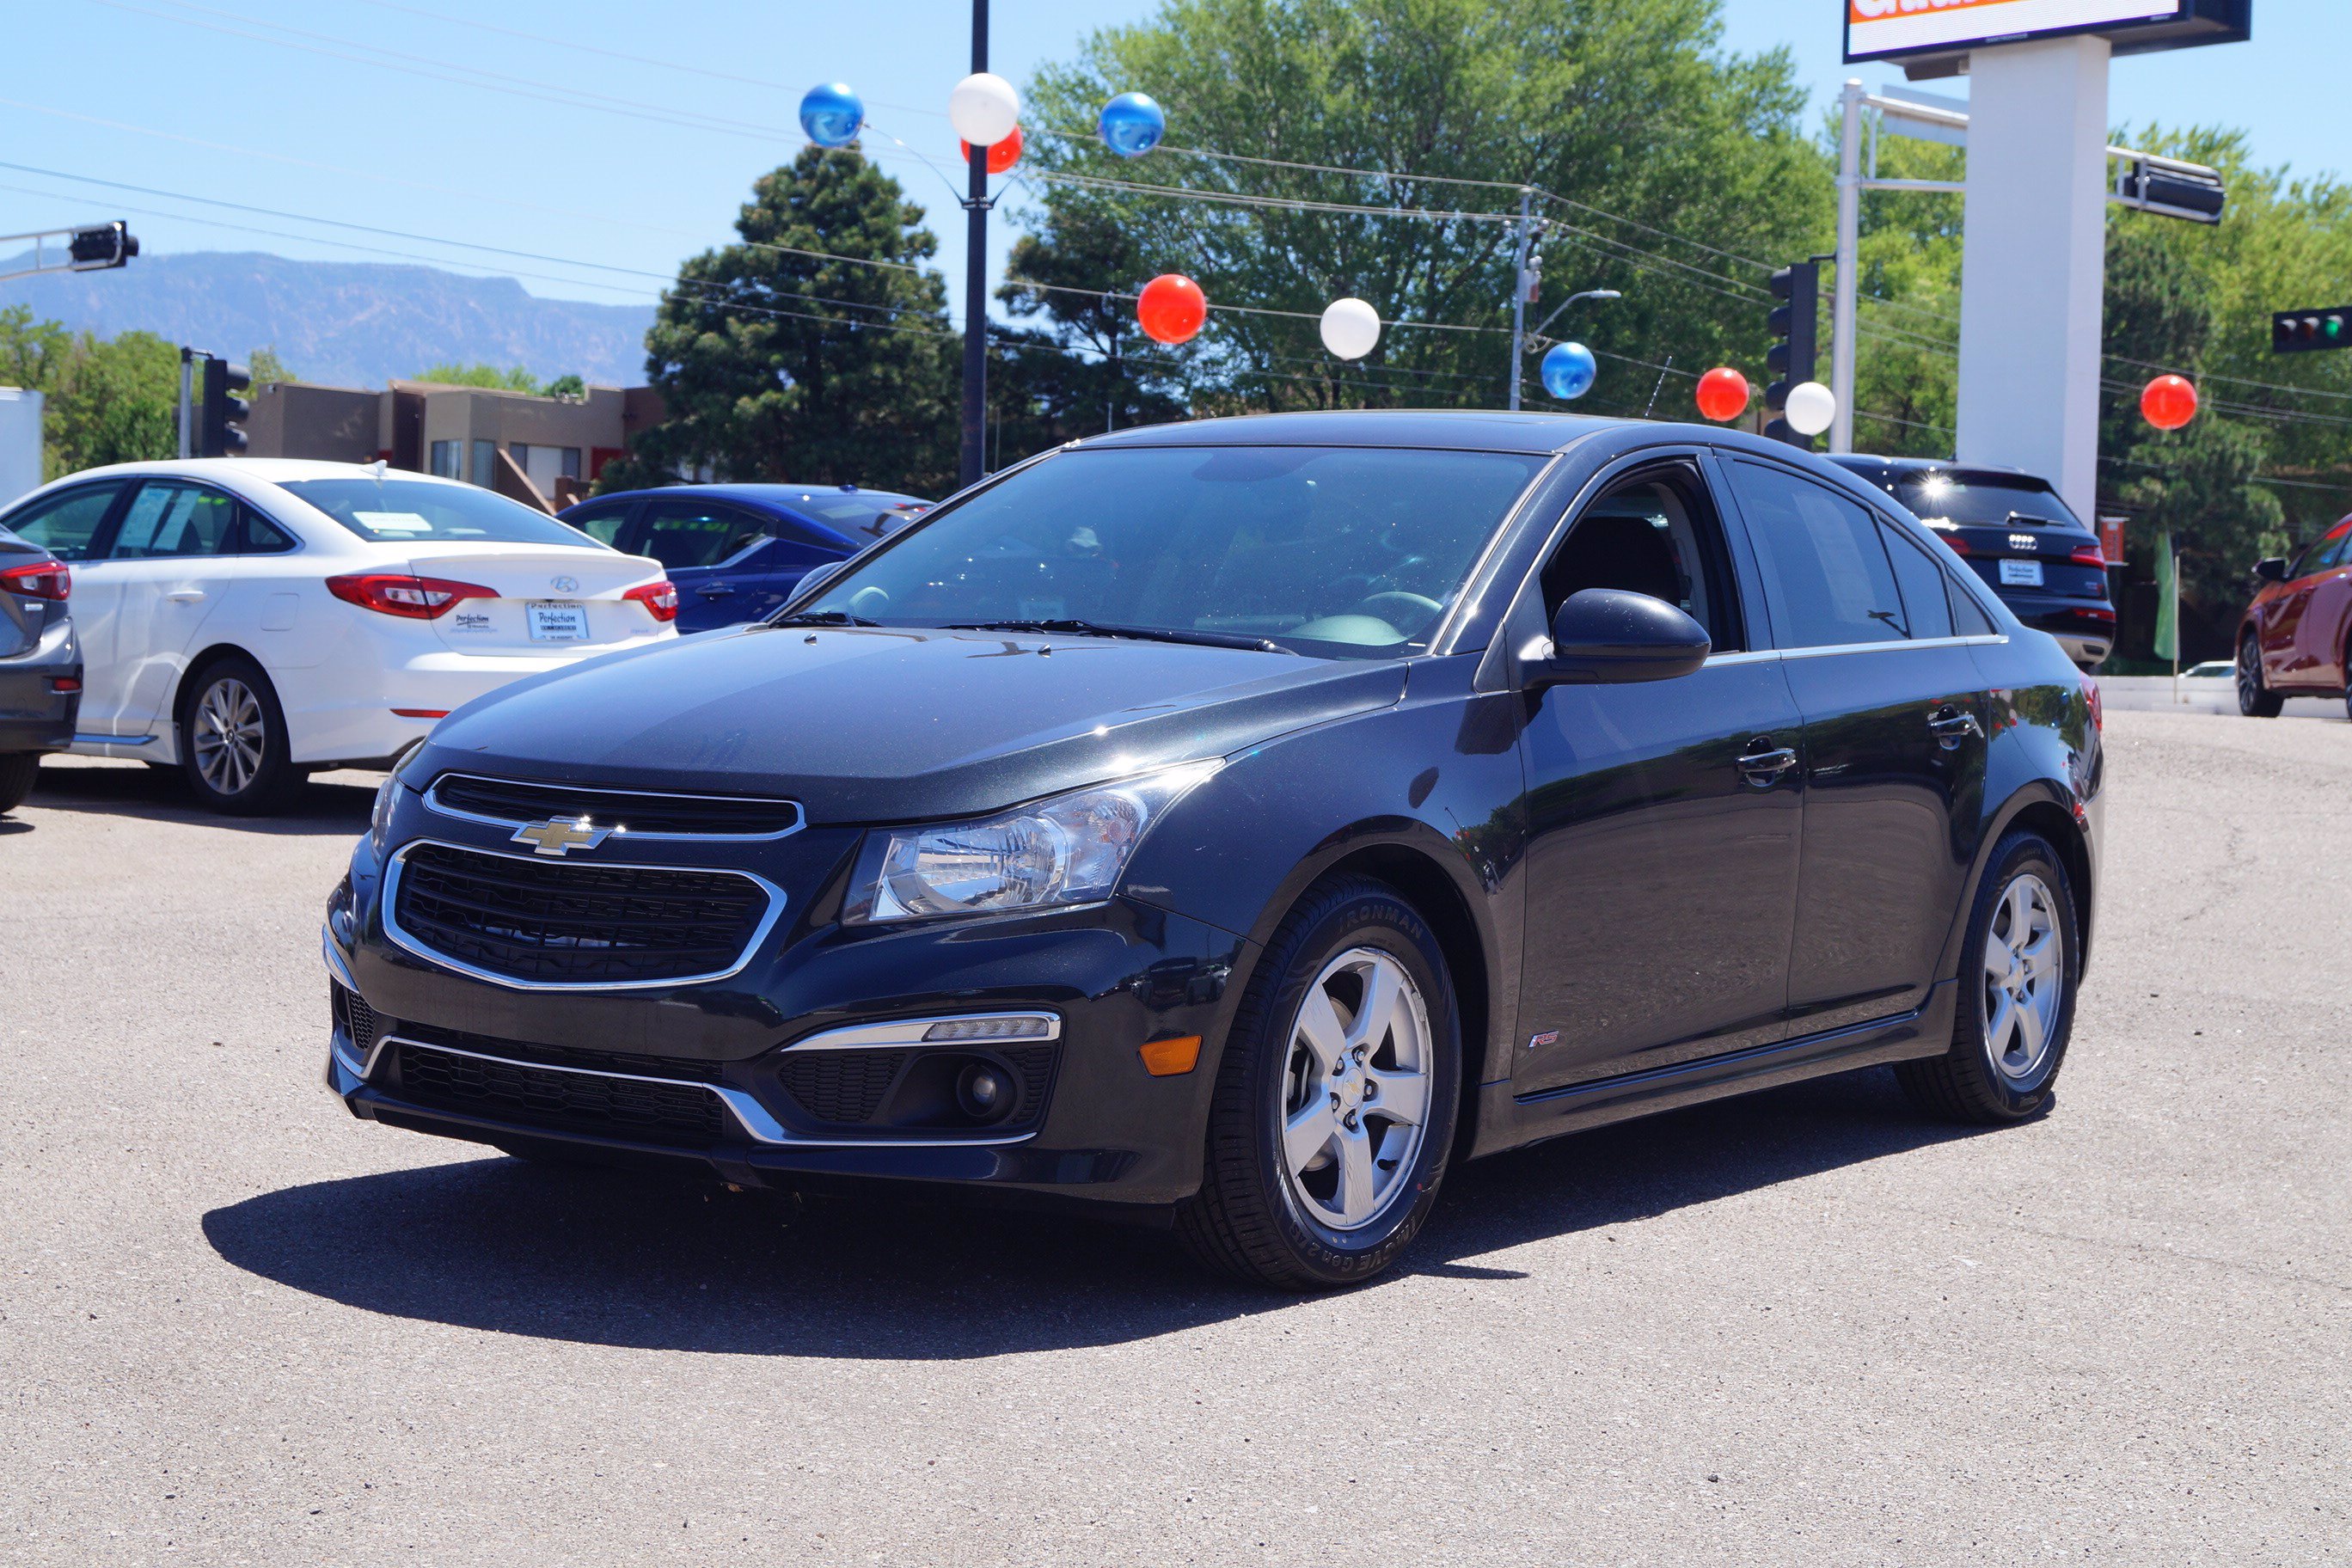 Pre-Owned 2016 Chevrolet Cruze Limited LT 4dr Car in Albuquerque # ...